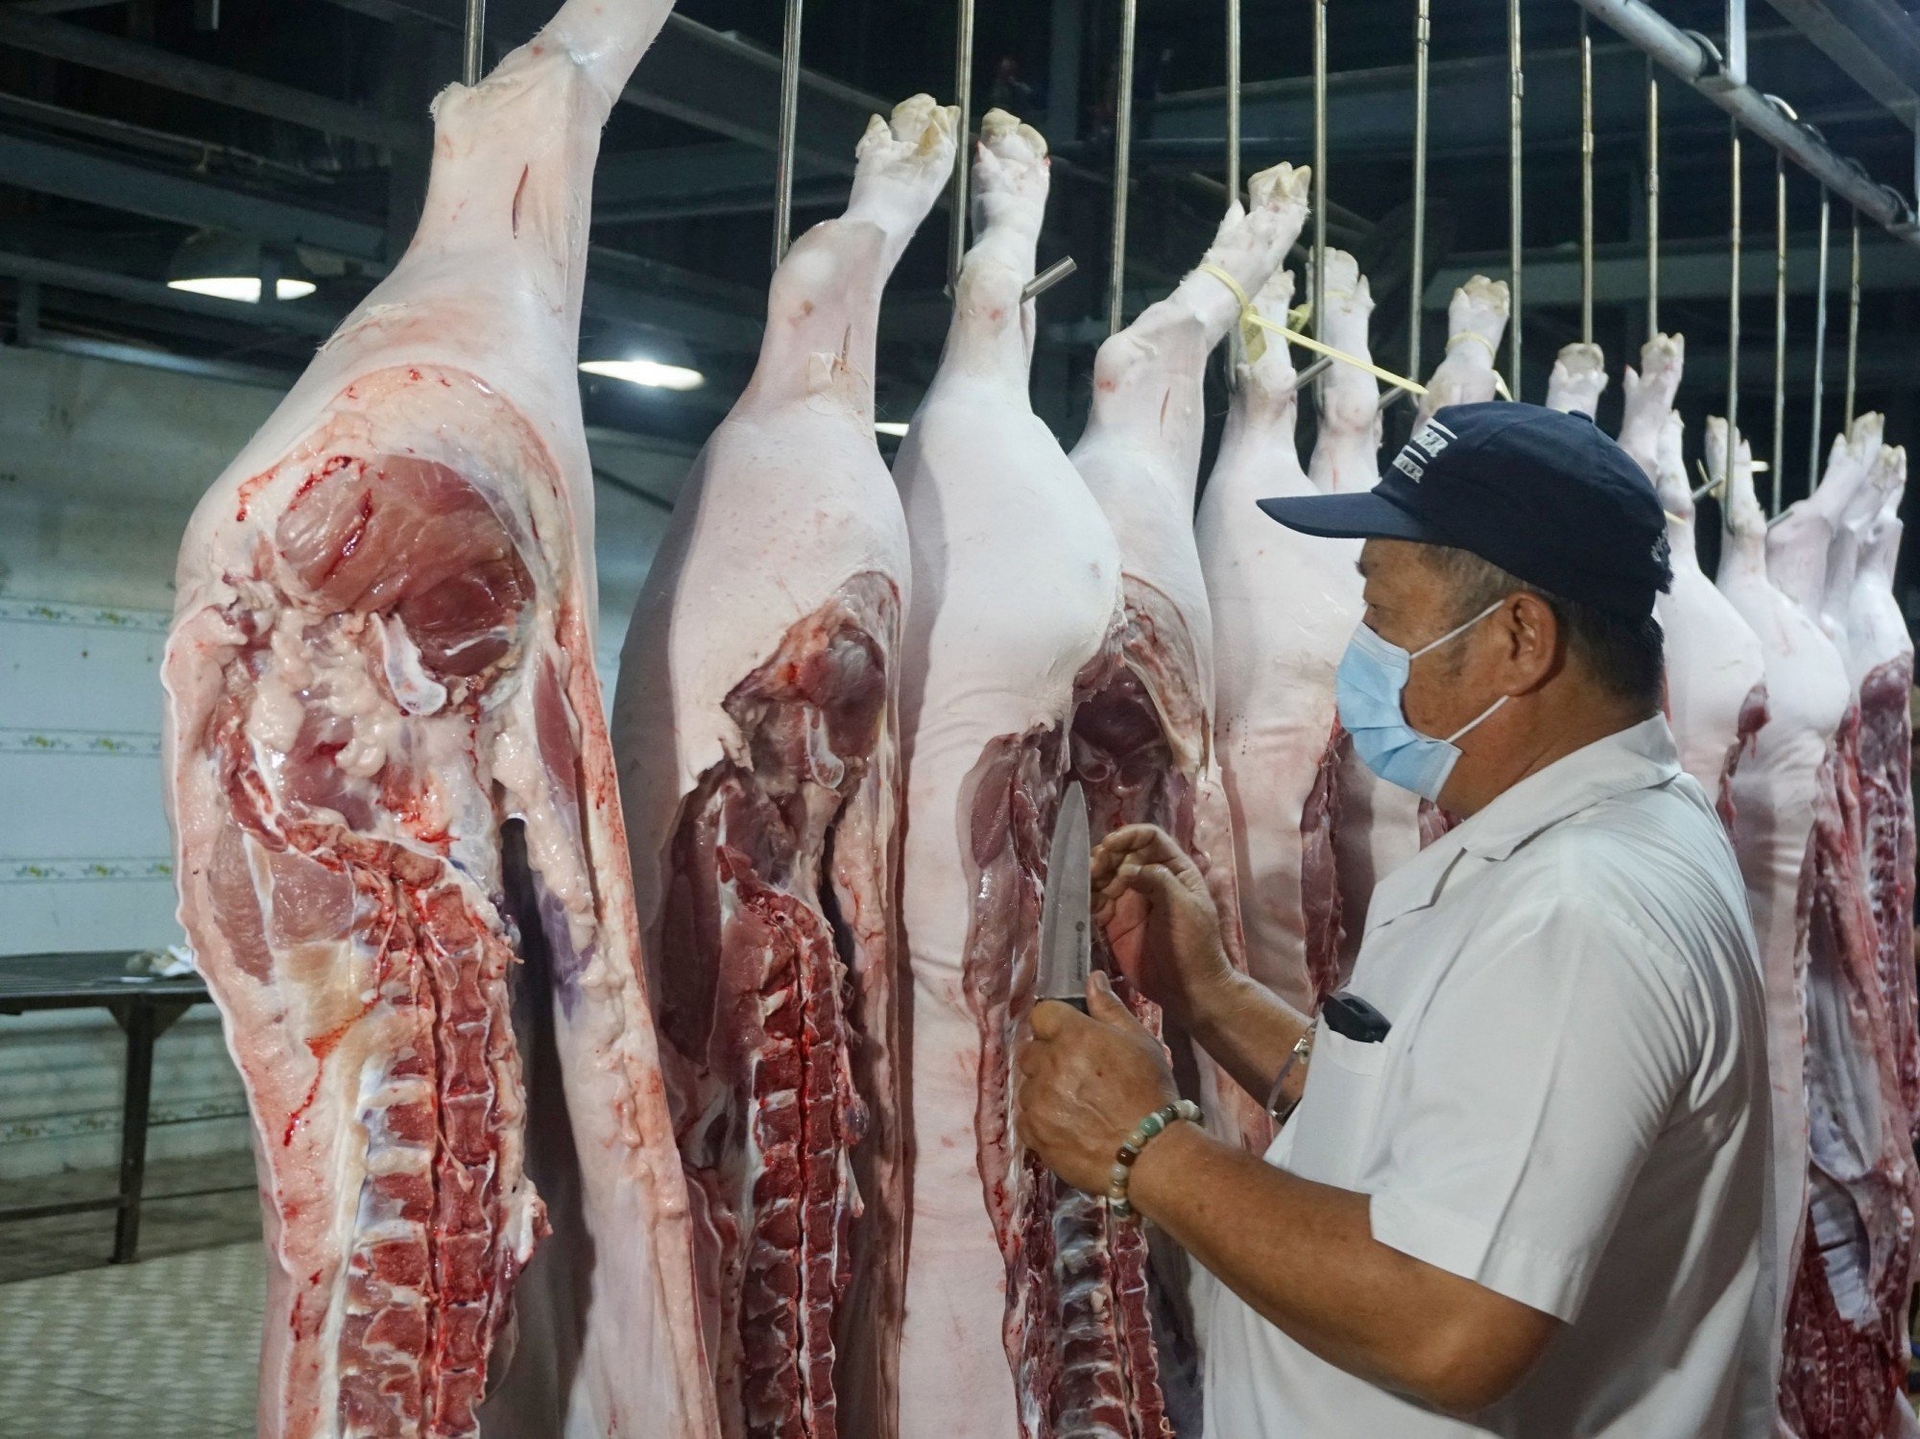 Pork production is expecting a recovery in Asian countries. Photo: VAN.